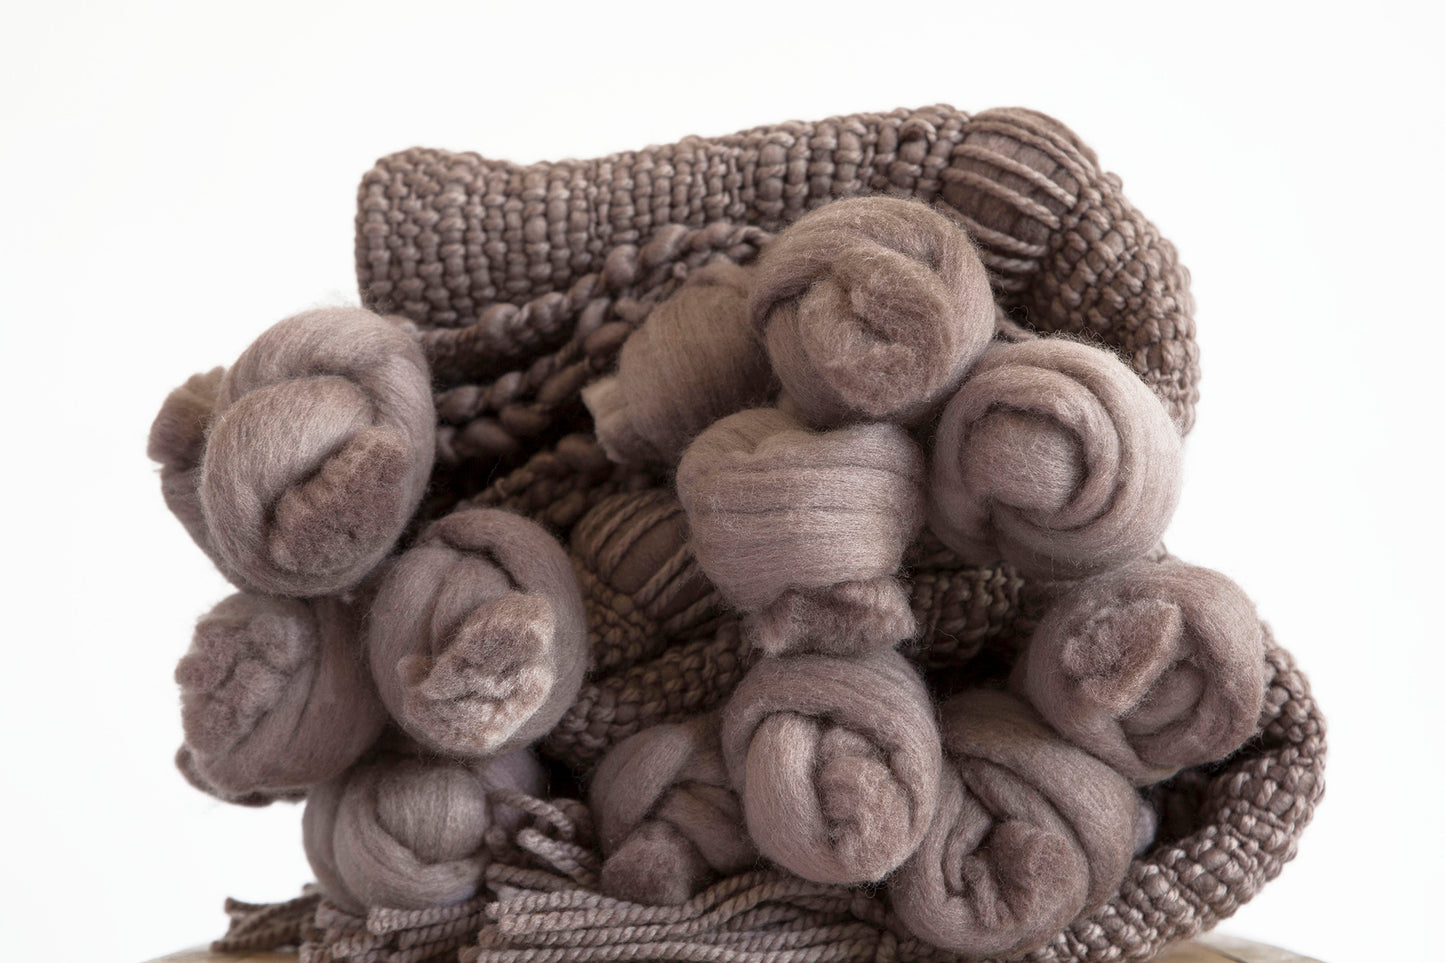 Knot Wool Throw Blanket in Taupe 37*75